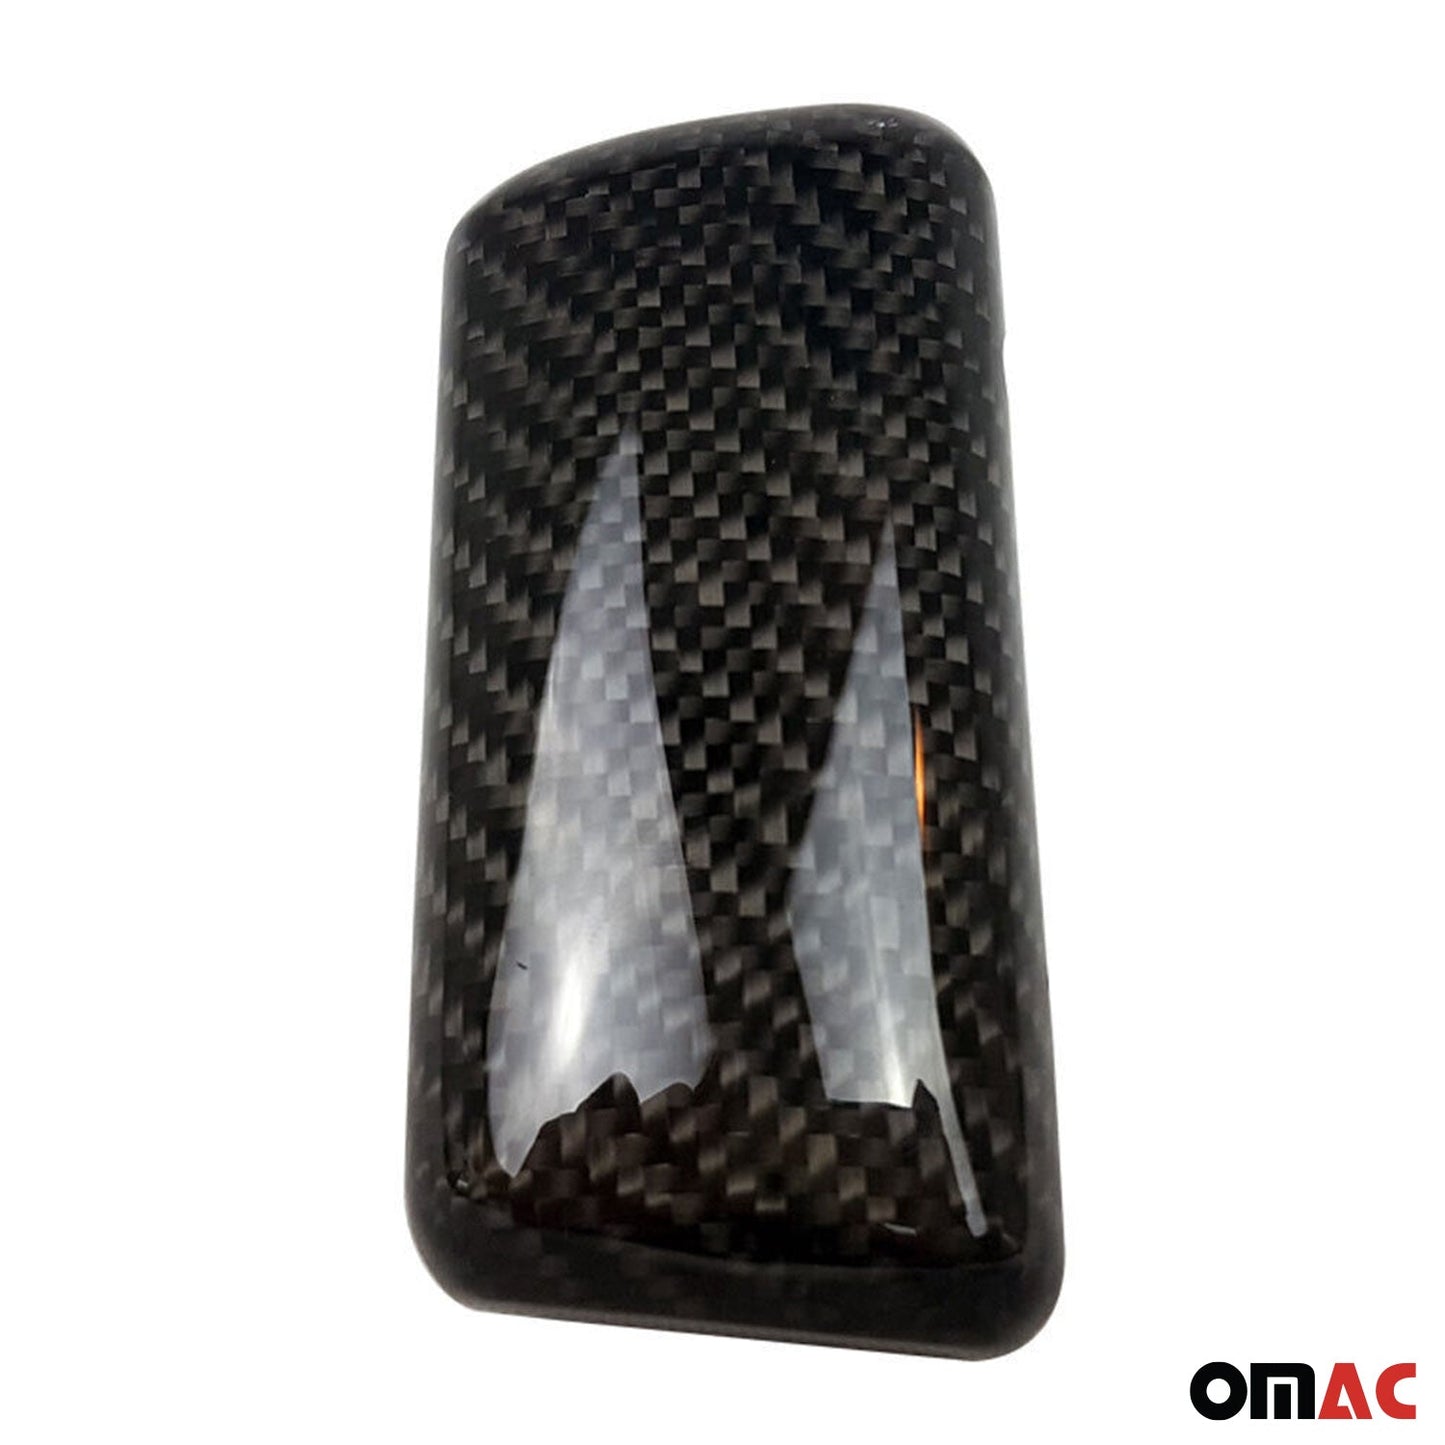 OMAC Gear Shift Knob for BMW E87E90 E91 E92E93X3 X5 Carbon Automatic T-Handle A001771